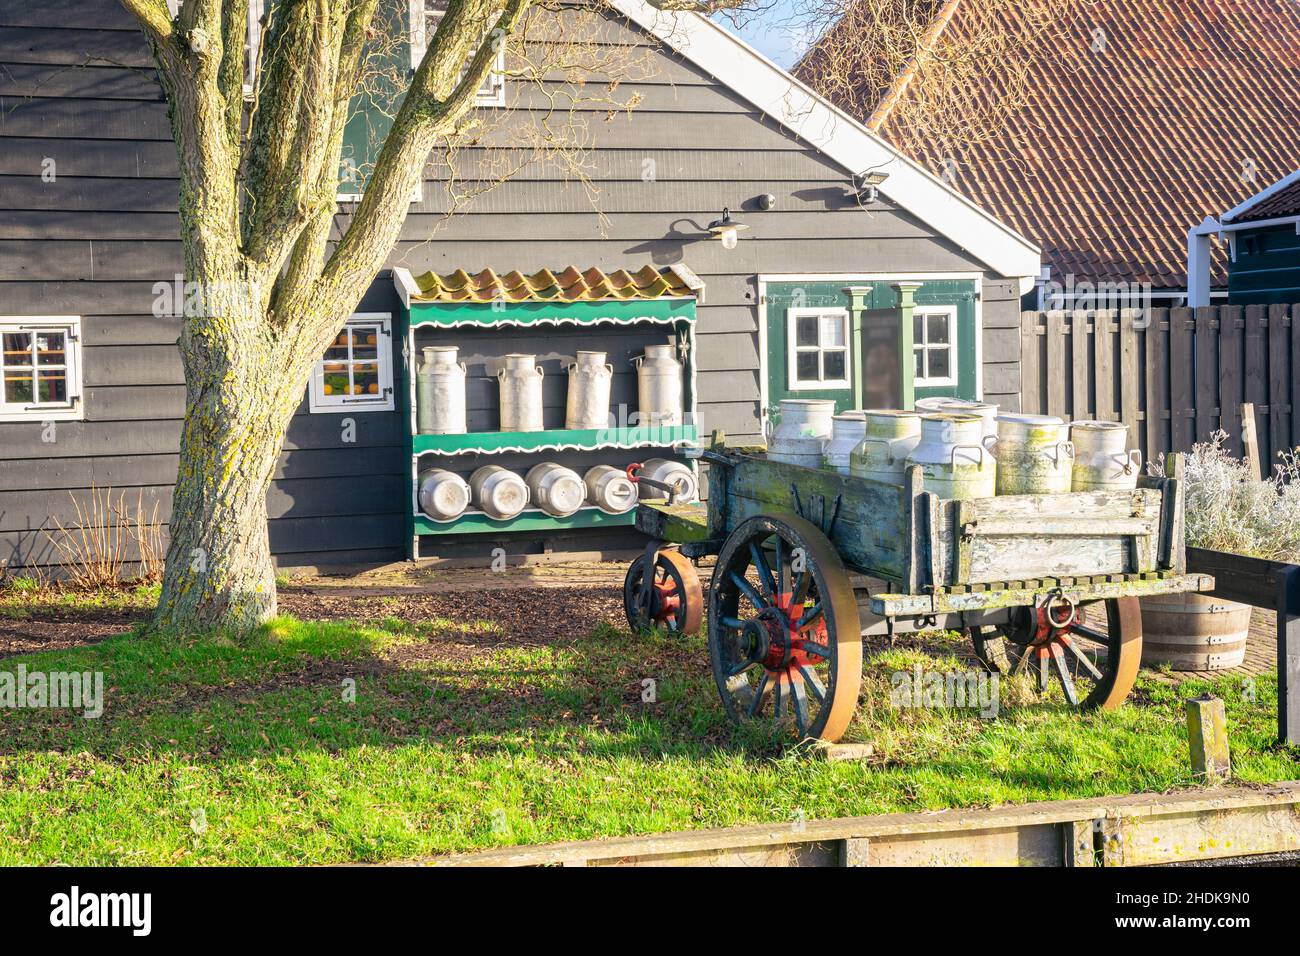 Old Dutch scene with a cart with milk cans at a farm Stock Photo